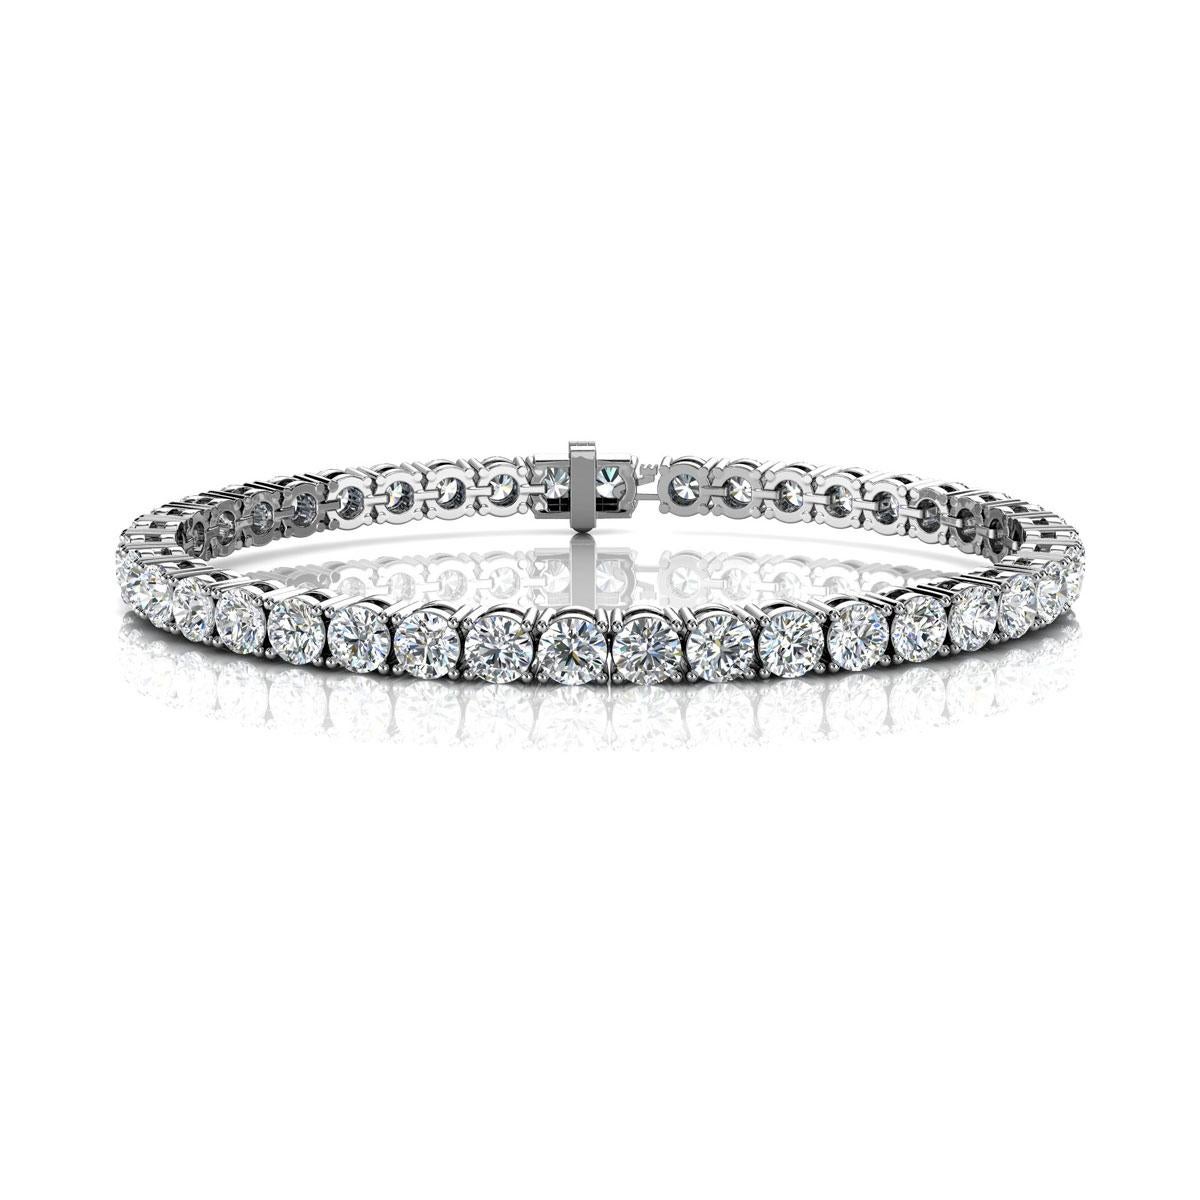 A timeless four prongs diamonds tennis bracelet. Experience the Difference!

Product details: 

Center Gemstone Type: NATURAL DIAMOND
Center Gemstone Color: WHITE
Center Gemstone Shape: ROUND
Center Diamond Carat Weight: 10
Metal: Platinum
Metal